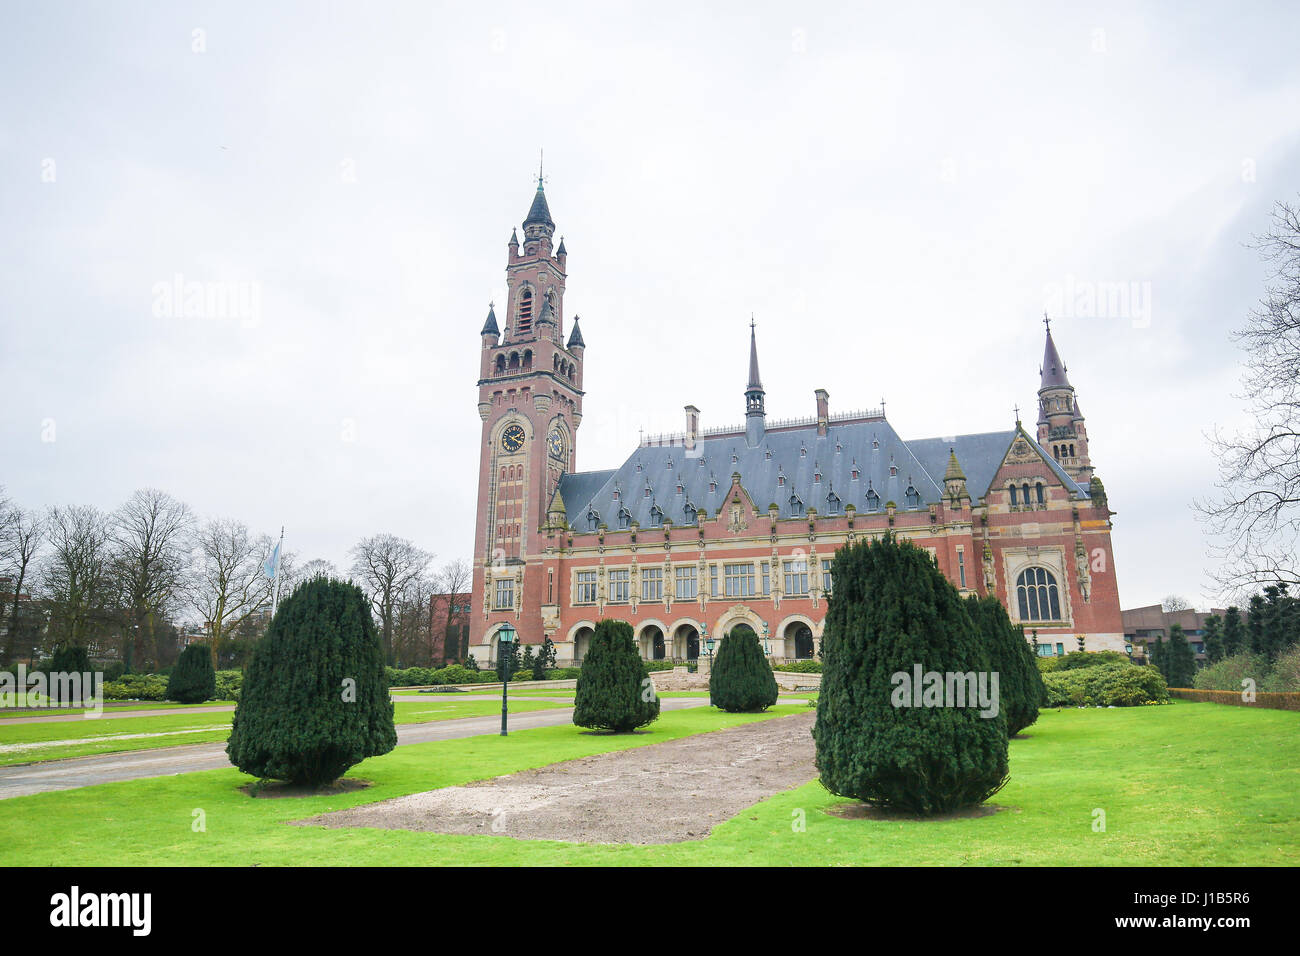 The Peace Palace is an international law building in The Hague, the Netherlands. It houses the International Court of Justice, the Permanent Court of  Stock Photo